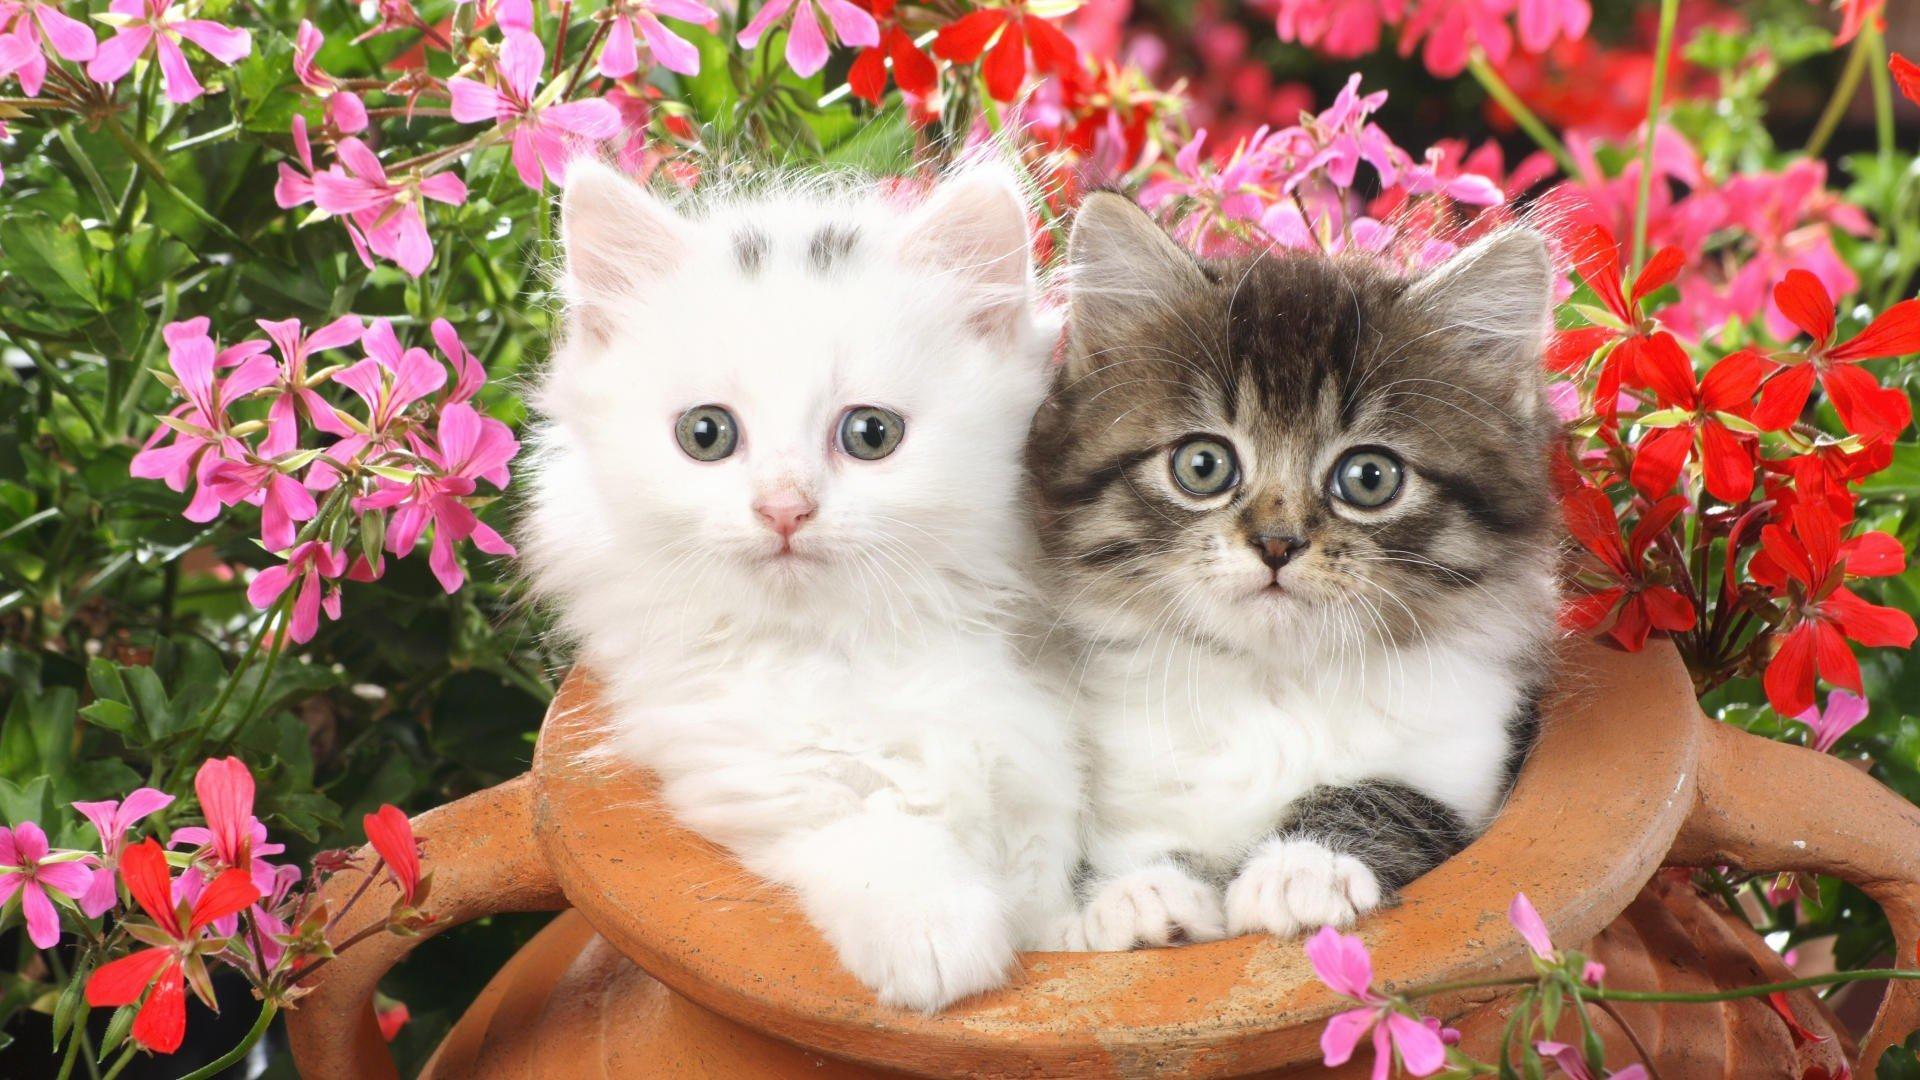 Cute Baby Cats And Flowers Wallpaper Cute Wallpaper